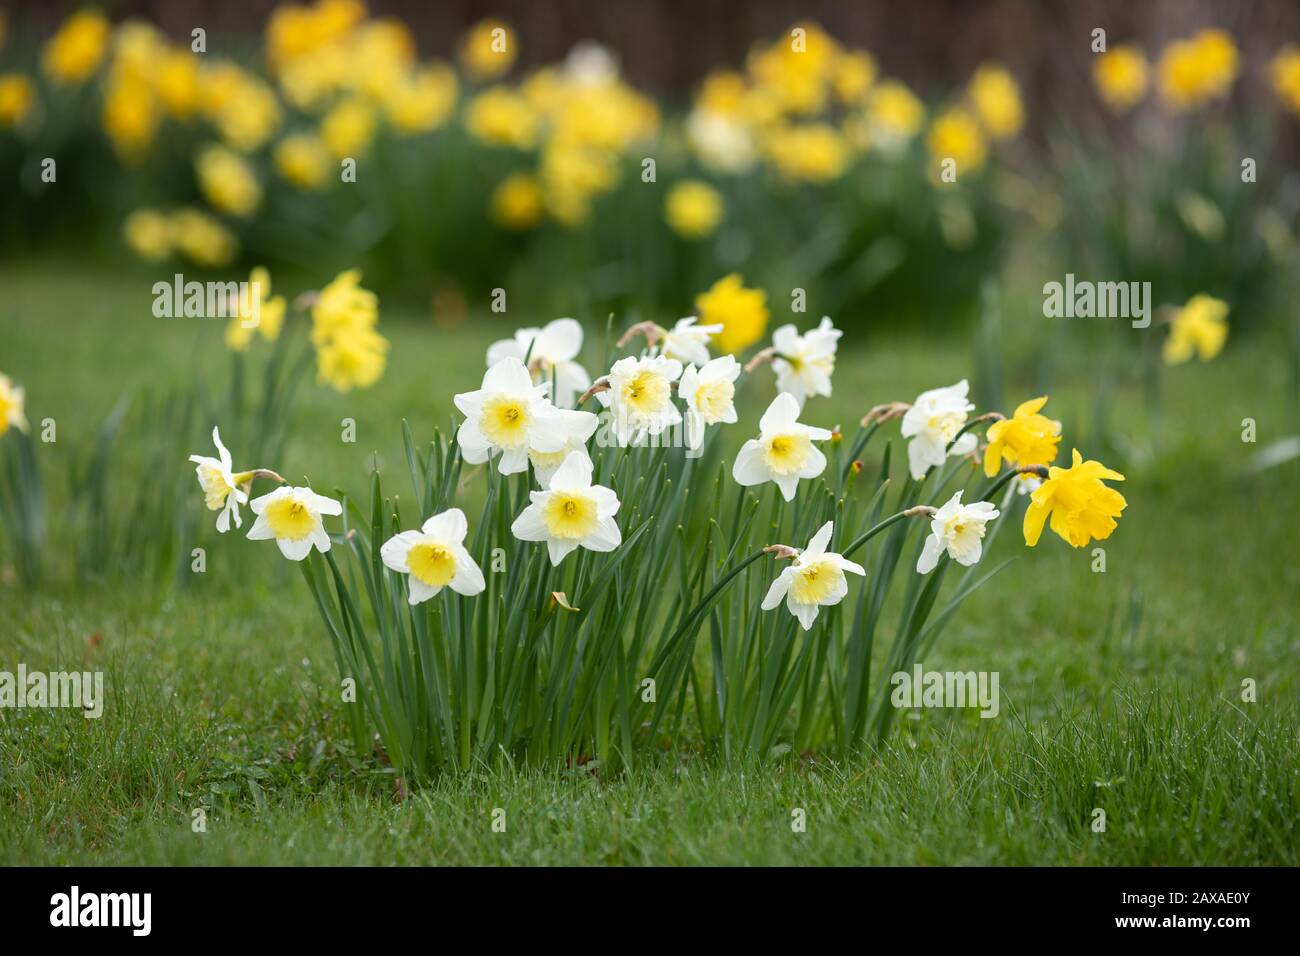 Narcissus Ice Follies in a group isolated with yellow daffodils in the background Stock Photo